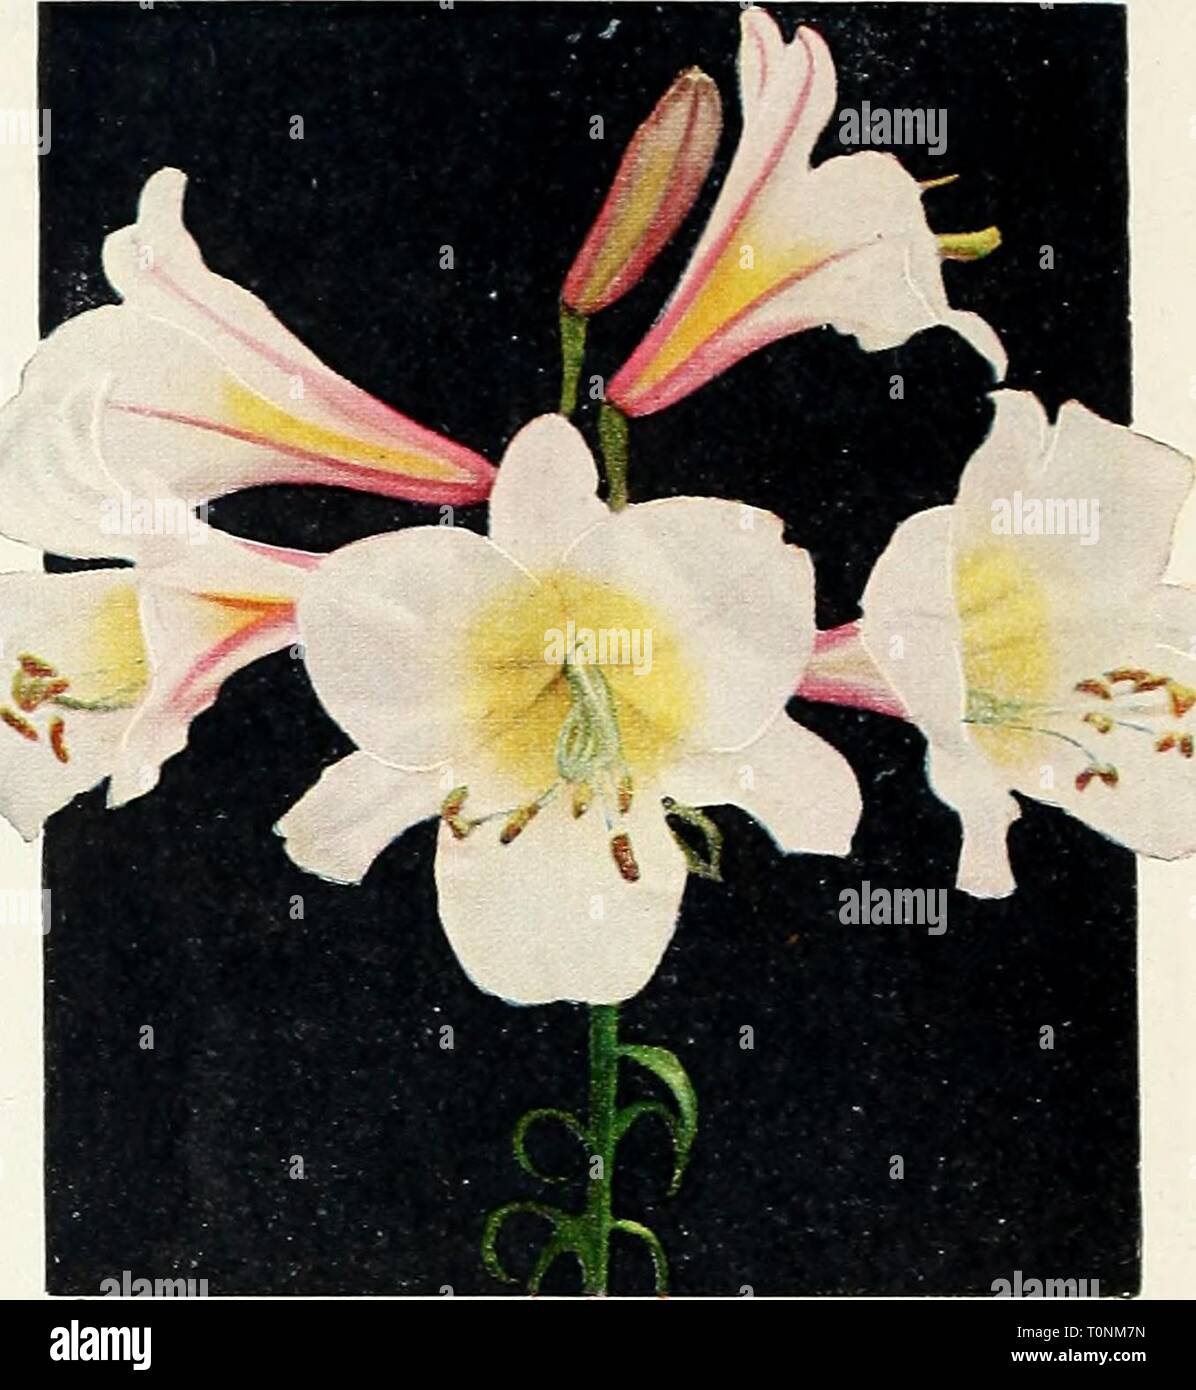 Dreer's 1951 autumn catalog for Dreer's 1951 autumn catalog for spring beauty  dreers1951autumn1951henr Year: 1951  DREER'S Hardy LILIES The Stately and Exquisite 'Monitments of the Garden'* Lilies are truly noble plants, graceful and magnificent. They are robust, long-lived, hardy and survive with a minirauin of care under a wide variety of soU and climatic conditions. We offer a quality selection of the most successful and popular varieties. Candidum (Madonna Lily). June Blooming. A very lovely, very sweet, and very tantalizing Lily, white and pure. Flowers in large clumps, on tall straight  Stock Photo